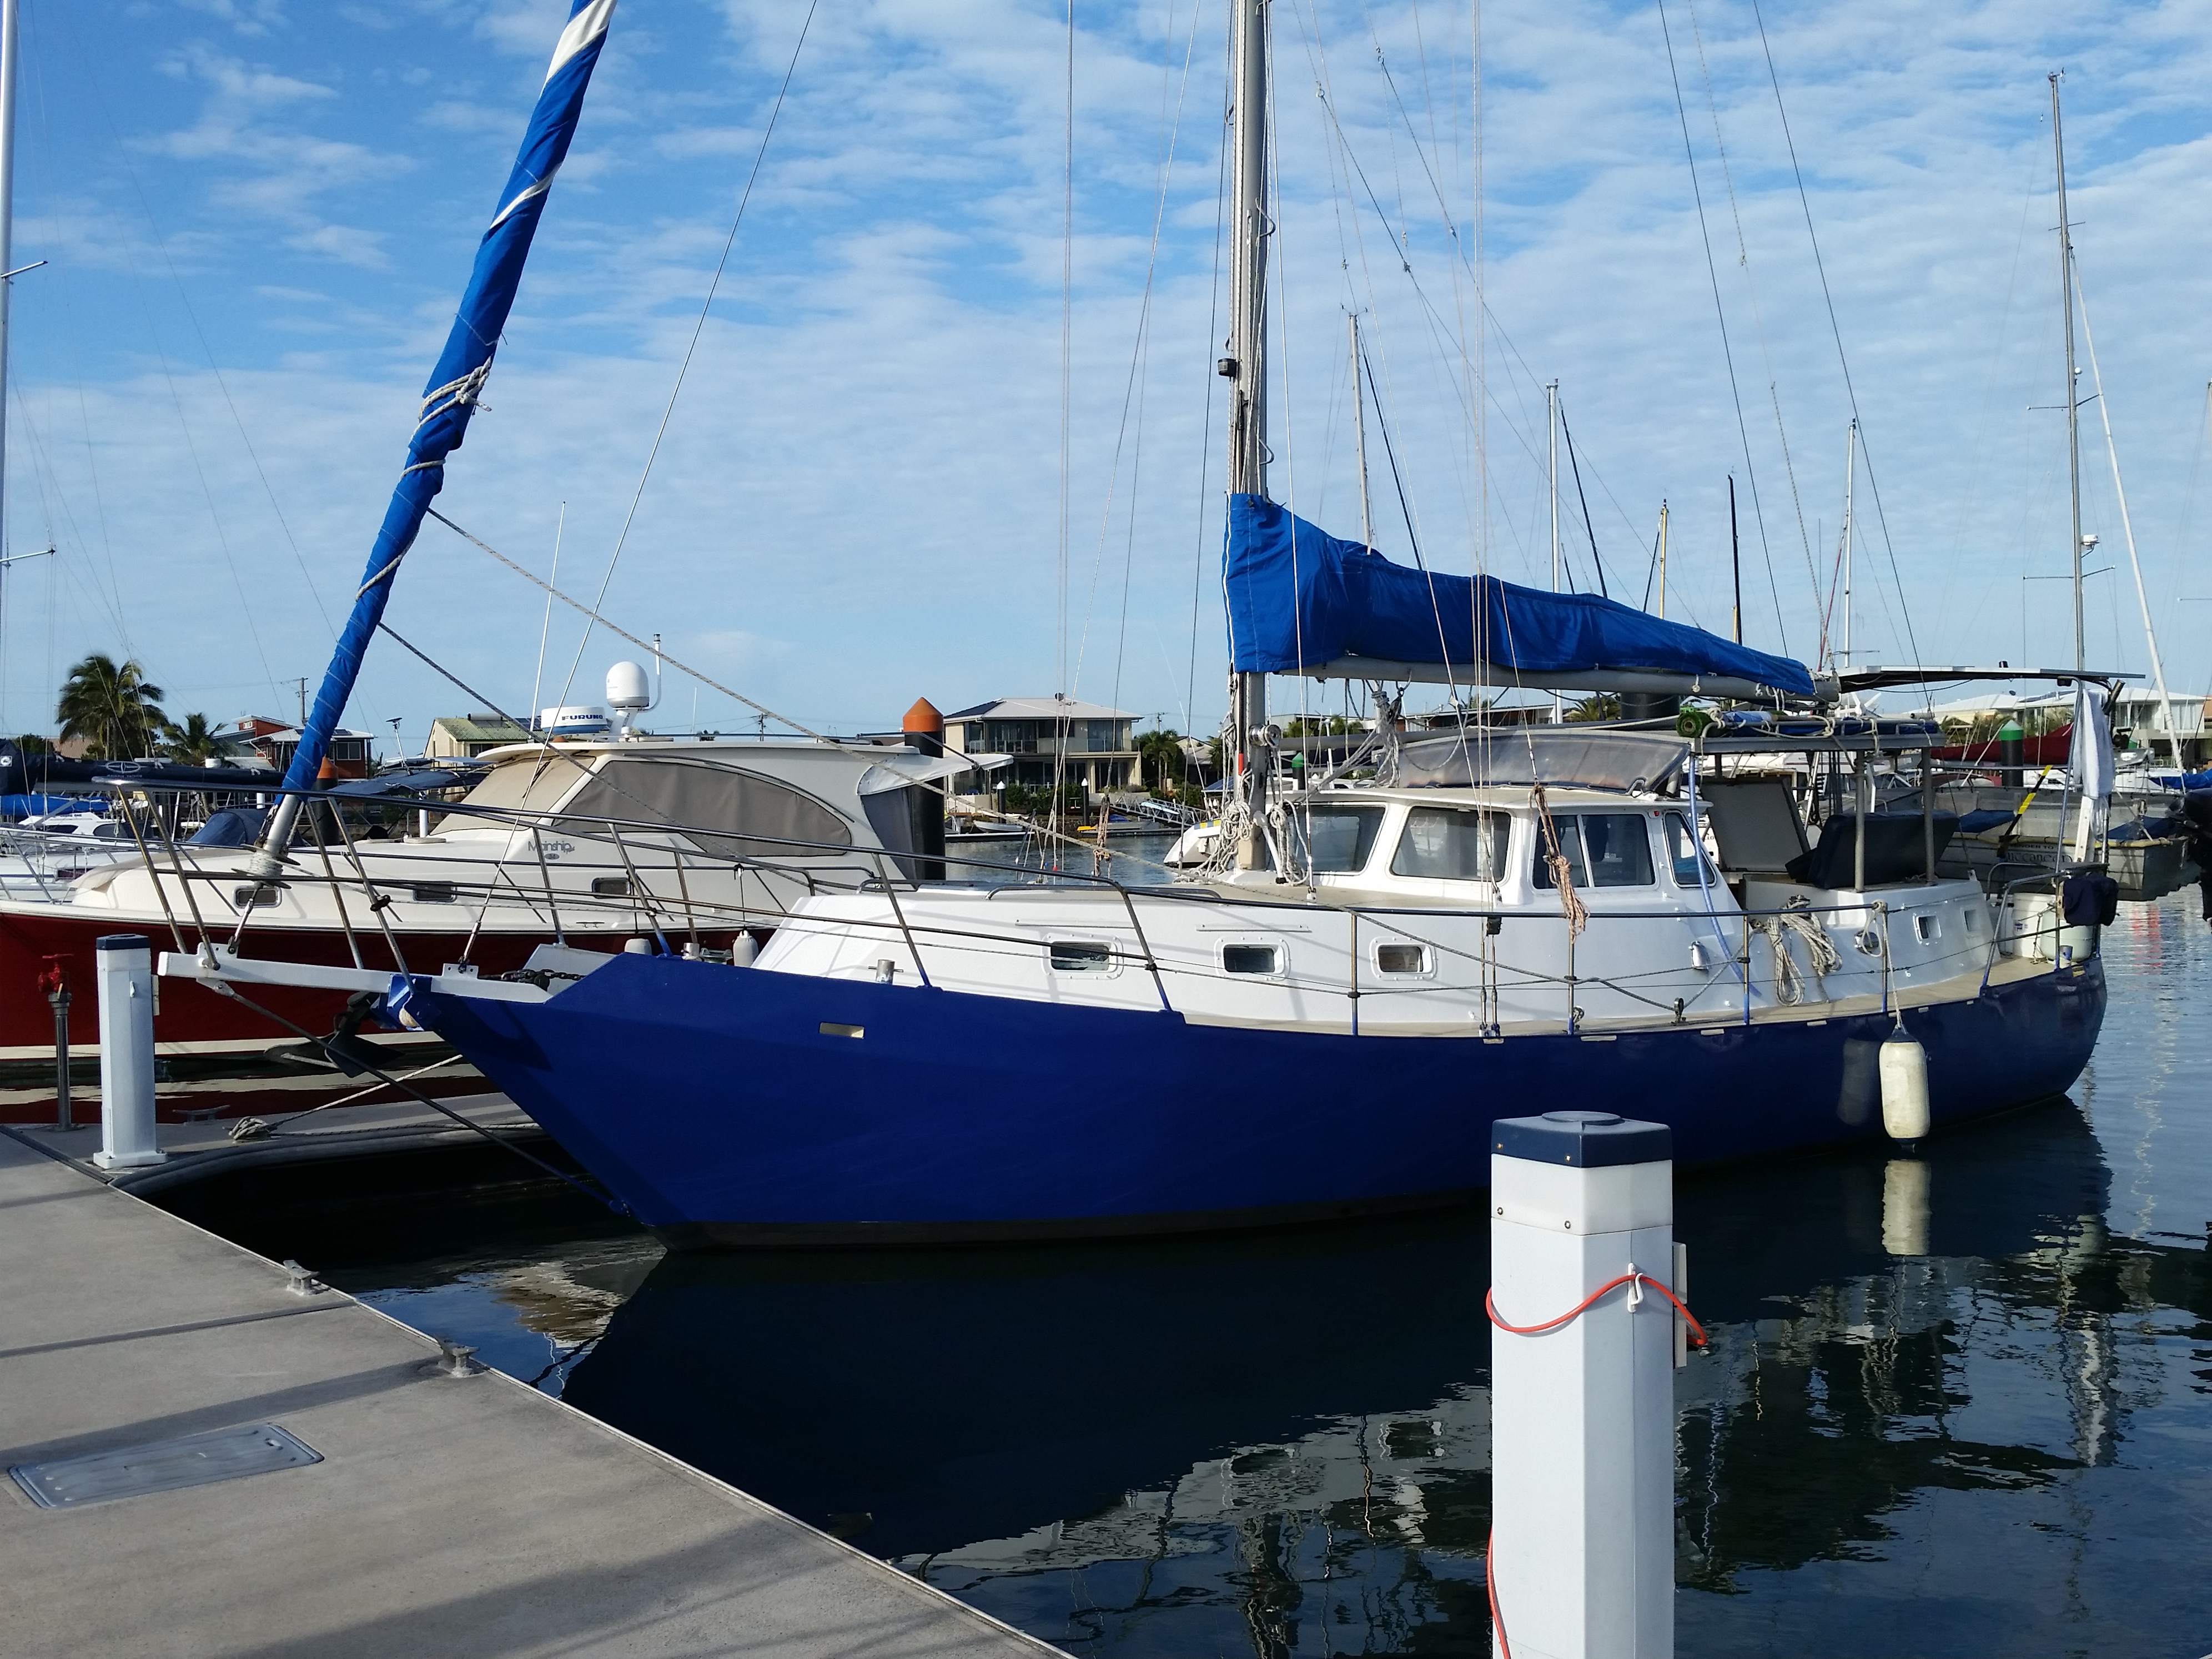 Buccaneer Roberts Spray delivered from Lake Macquarie to Mooloolabar by skipper David Mitchell